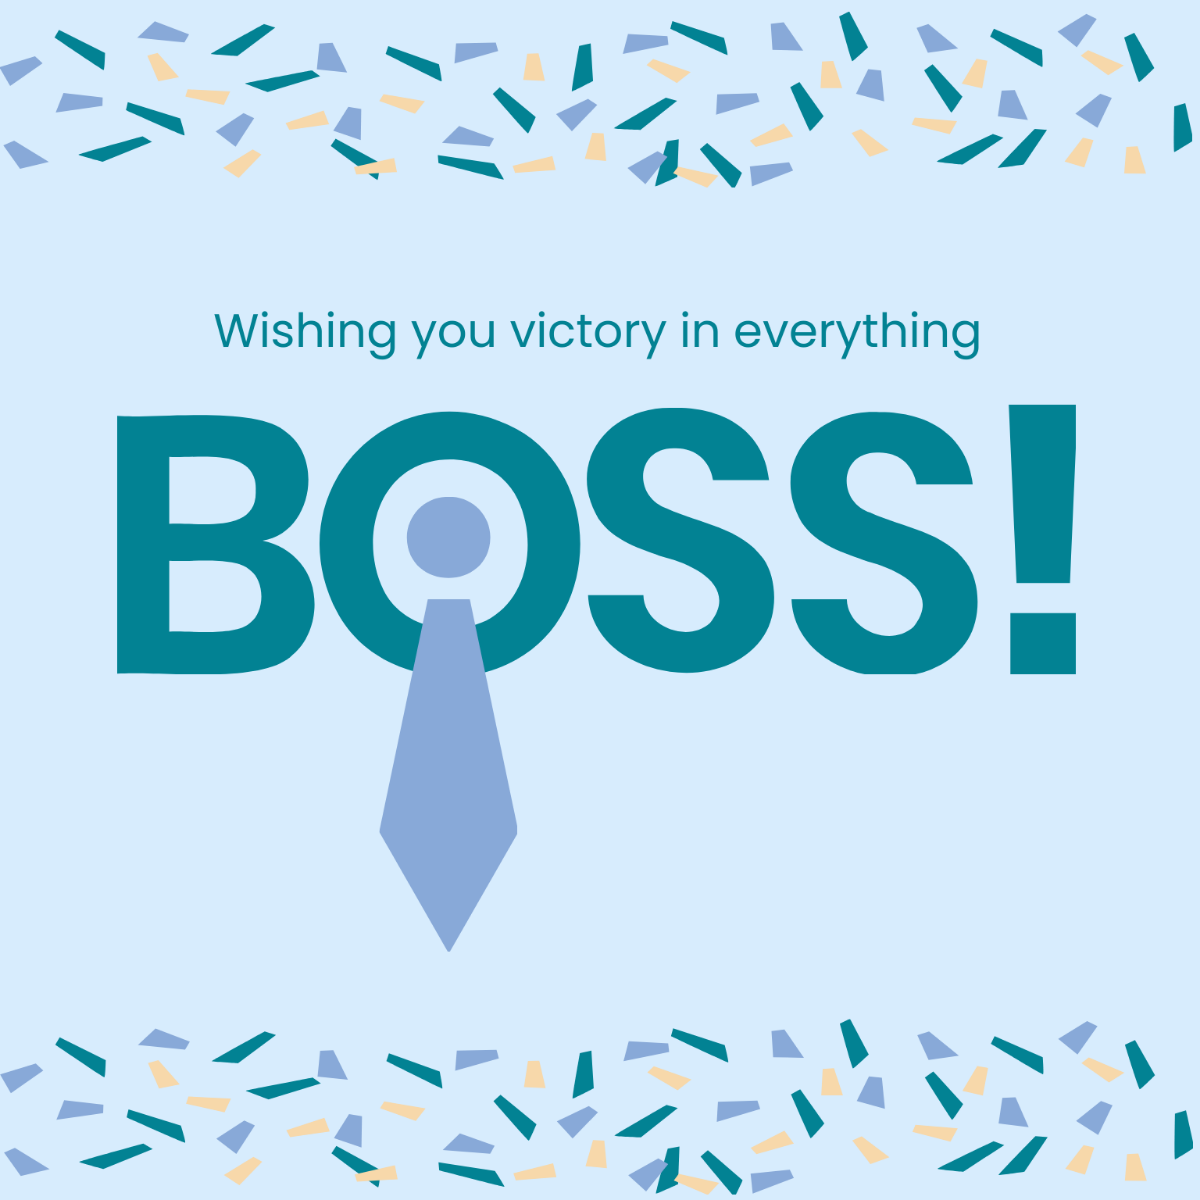 Boss' Day Wishes Vector Template